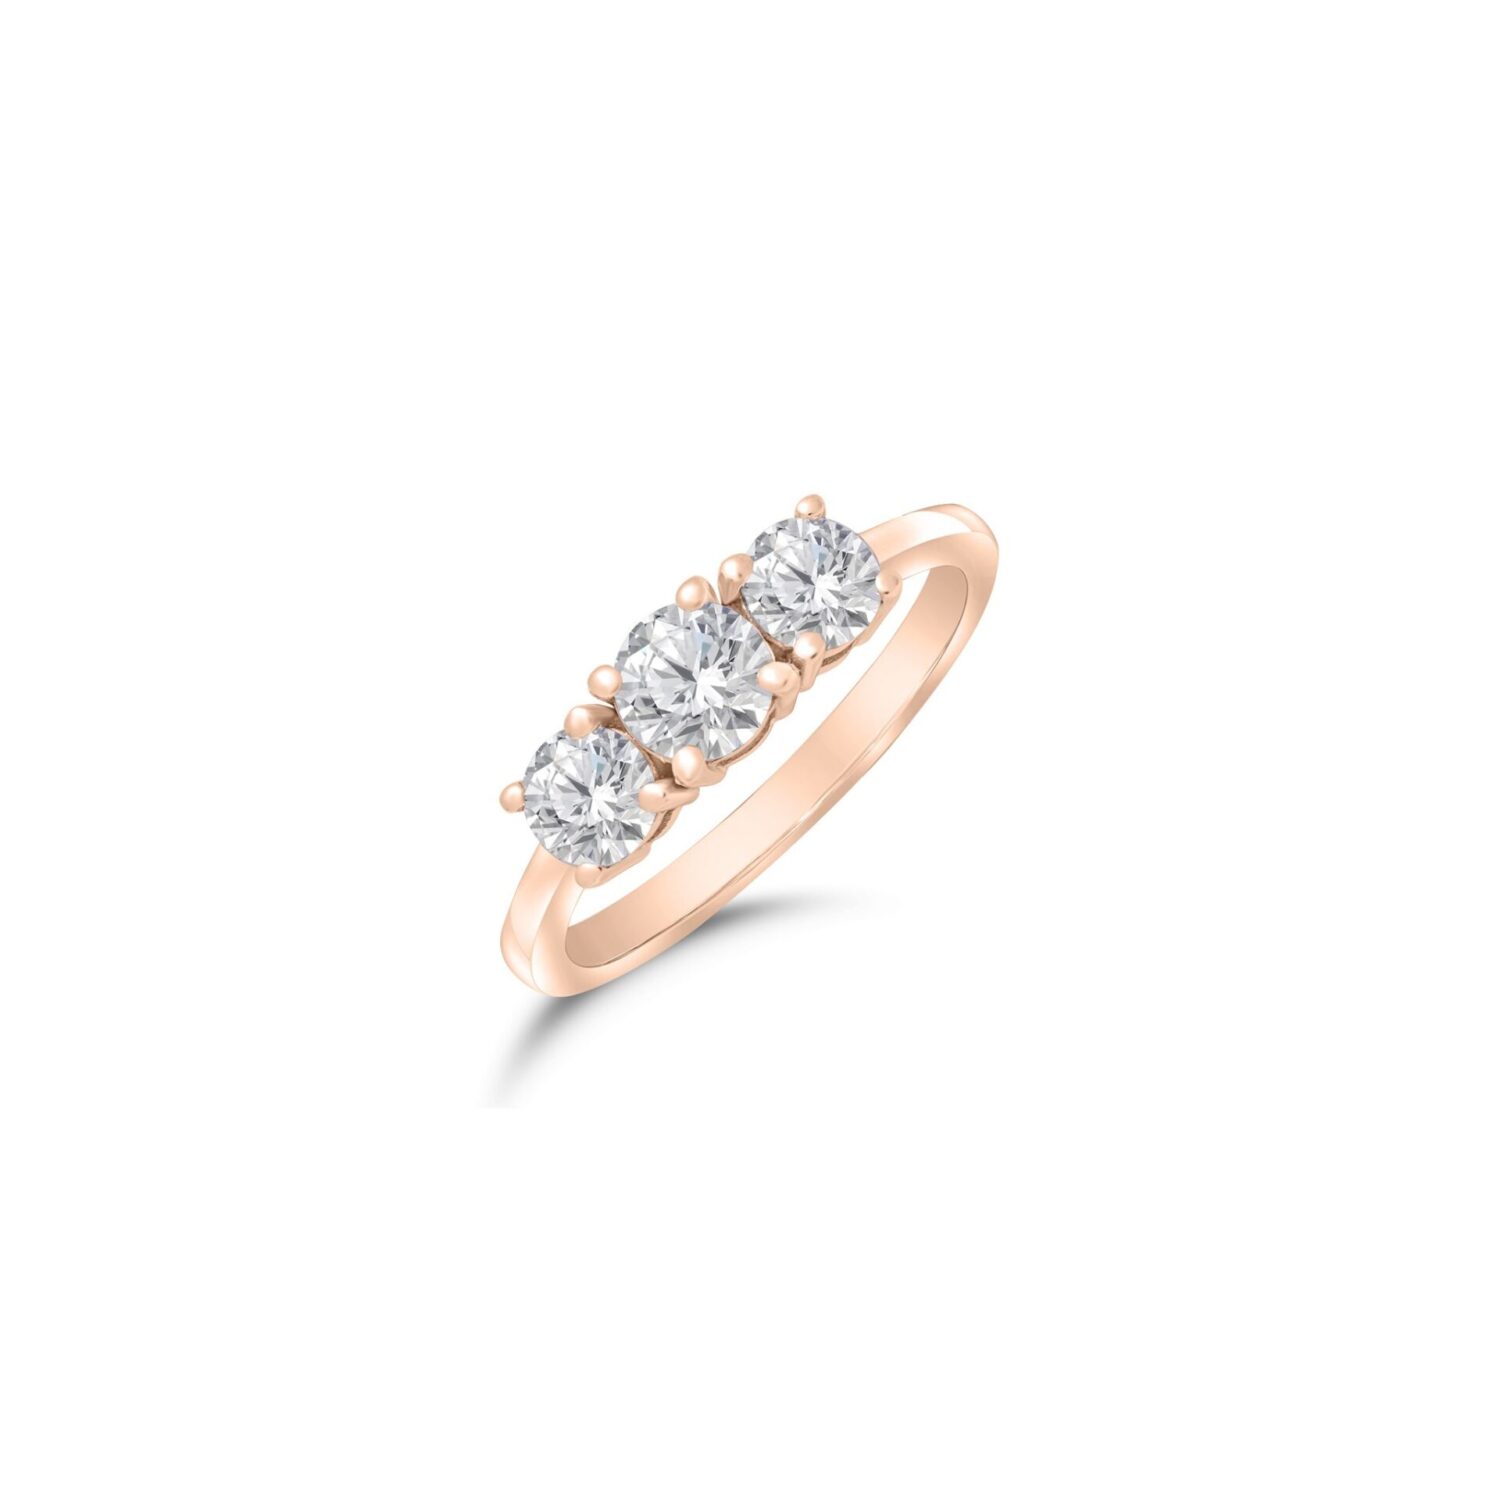 Lab grown diamonds in Cyprus - Diamond Ring 3 Stones 1 Carat - Rose Gold best quality and price